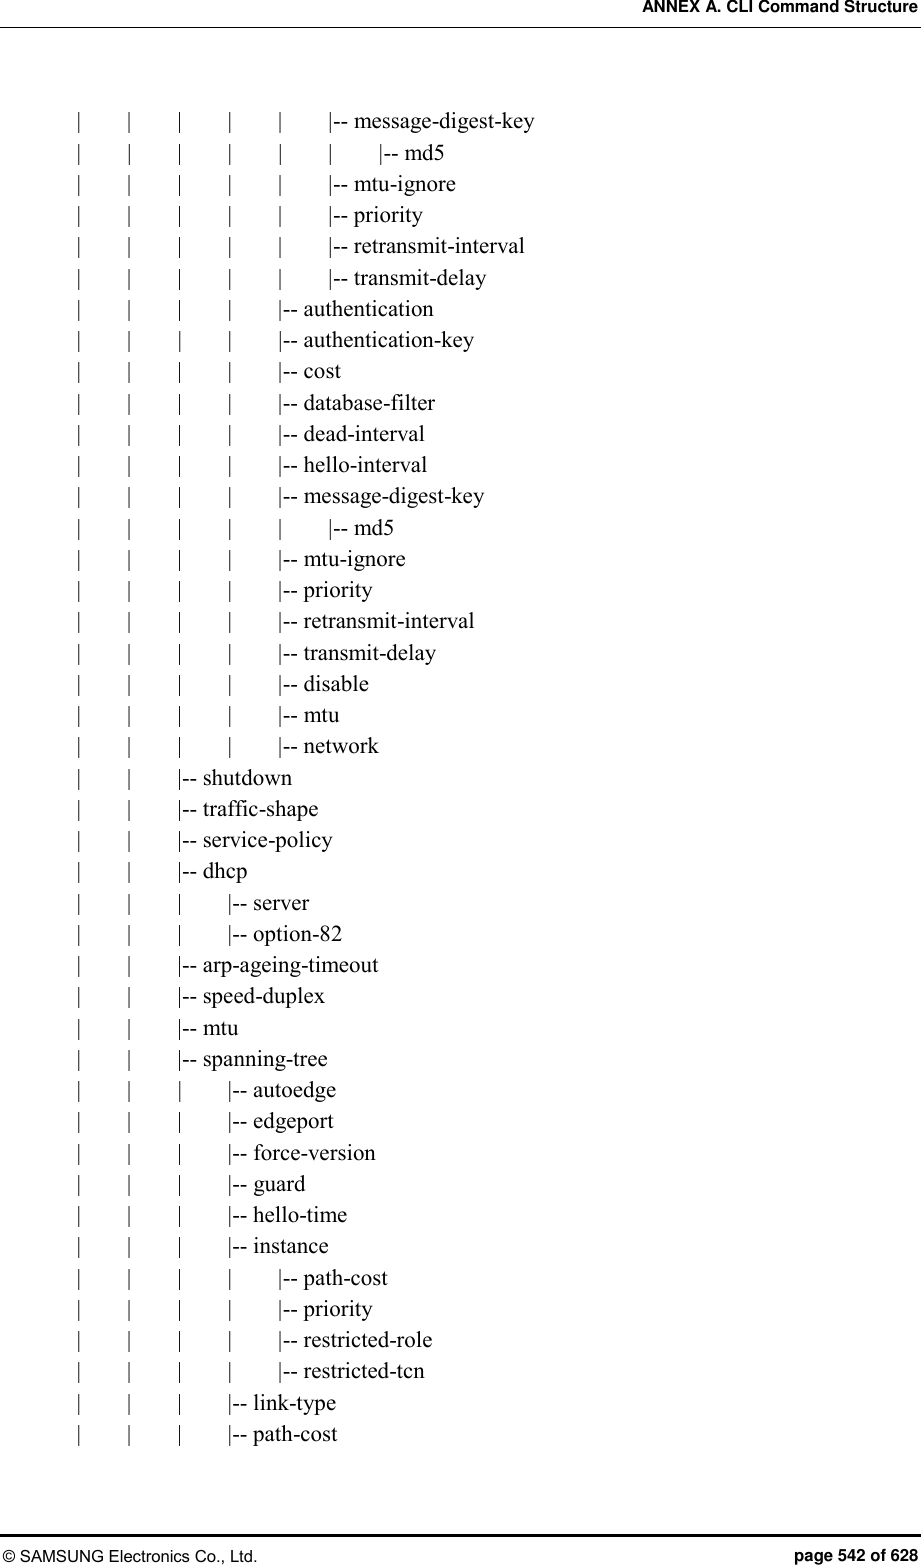 ANNEX A. CLI Command Structure © SAMSUNG Electronics Co., Ltd.  page 542 of 628 |        |        |        |        |        |-- message-digest-key |    |        |        |        |        |        |-- md5 |        |        |        |        |        |-- mtu-ignore |        |        |        |        |        |-- priority |        |        |        |        |        |-- retransmit-interval |        |        |        |        |        |-- transmit-delay |        |        |        |        |-- authentication |        |        |        |        |-- authentication-key |        |        |        |        |-- cost |        |        |        |        |-- database-filter |        |        |        |        |-- dead-interval |        |        |        |        |-- hello-interval |        |        |        |        |-- message-digest-key |        |        |        |        |        |-- md5 |        |        |        |        |-- mtu-ignore |        |        |        |        |-- priority |        |        |        |        |-- retransmit-interval |        |        |        |        |-- transmit-delay |        |        |        |        |-- disable |        |        |        |        |-- mtu |        |        |        |        |-- network |        |        |-- shutdown |        |        |-- traffic-shape |        |        |-- service-policy |        |        |-- dhcp |        |        |        |-- server |        |        |        |-- option-82 |        |        |-- arp-ageing-timeout |        |        |-- speed-duplex |        |        |-- mtu |        |        |-- spanning-tree |        |        |        |-- autoedge |        |        |        |-- edgeport |        |        |        |-- force-version |        |        |        |-- guard |        |        |        |-- hello-time |        |        |        |-- instance |        |        |        |        |-- path-cost |        |        |        |        |-- priority |        |        |        |        |-- restricted-role |        |        |        |        |-- restricted-tcn |        |        |        |-- link-type |        |        |        |-- path-cost 